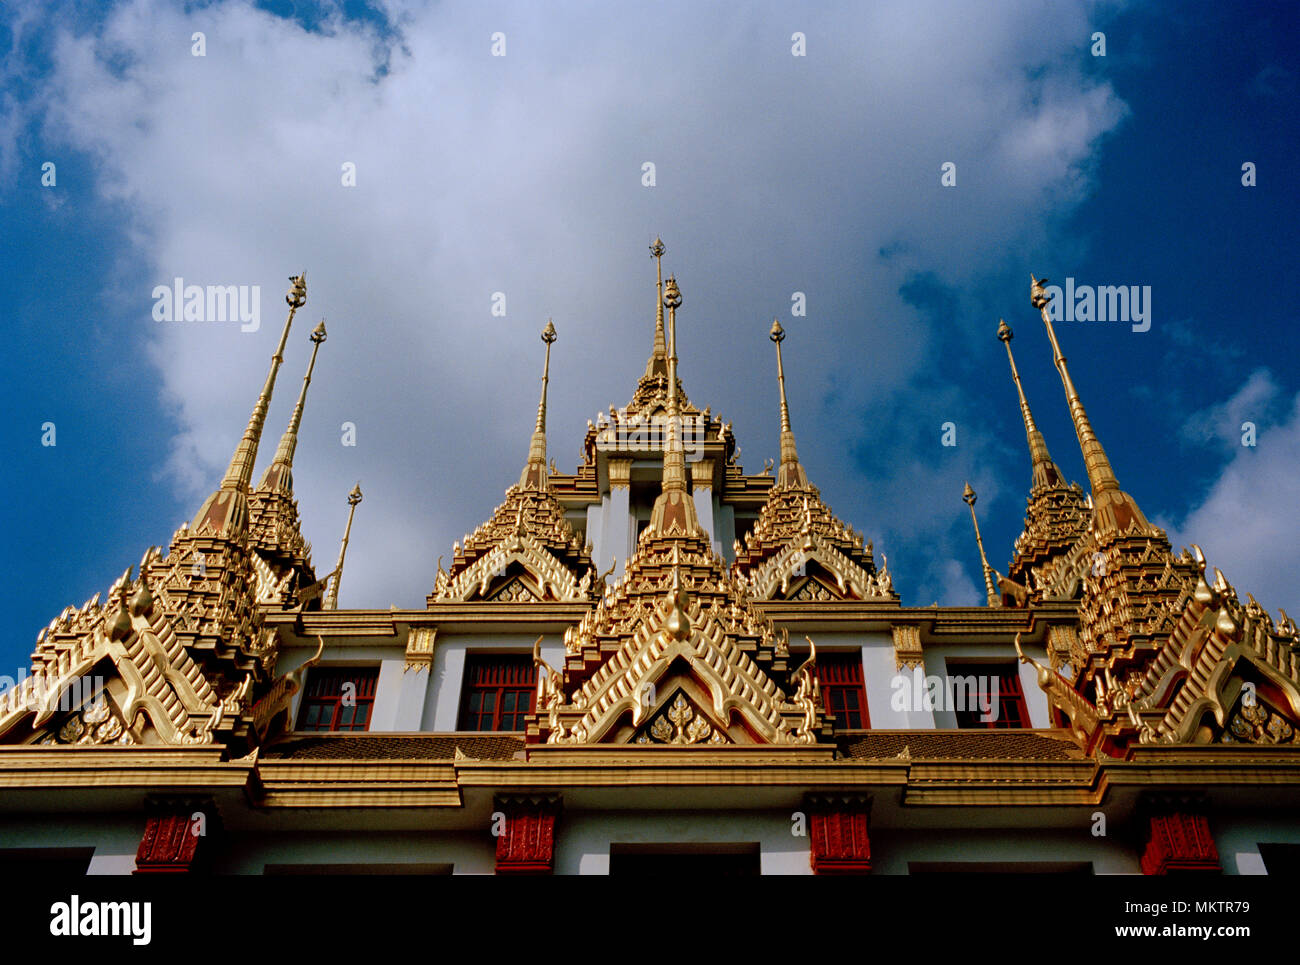 Spires of the Buddhist temple Loha Prasat Metal Castle of Wat Ratchanadda in Bangkok in Thailand in Southeast Asia Far East. Travel Holiday Site Stock Photo